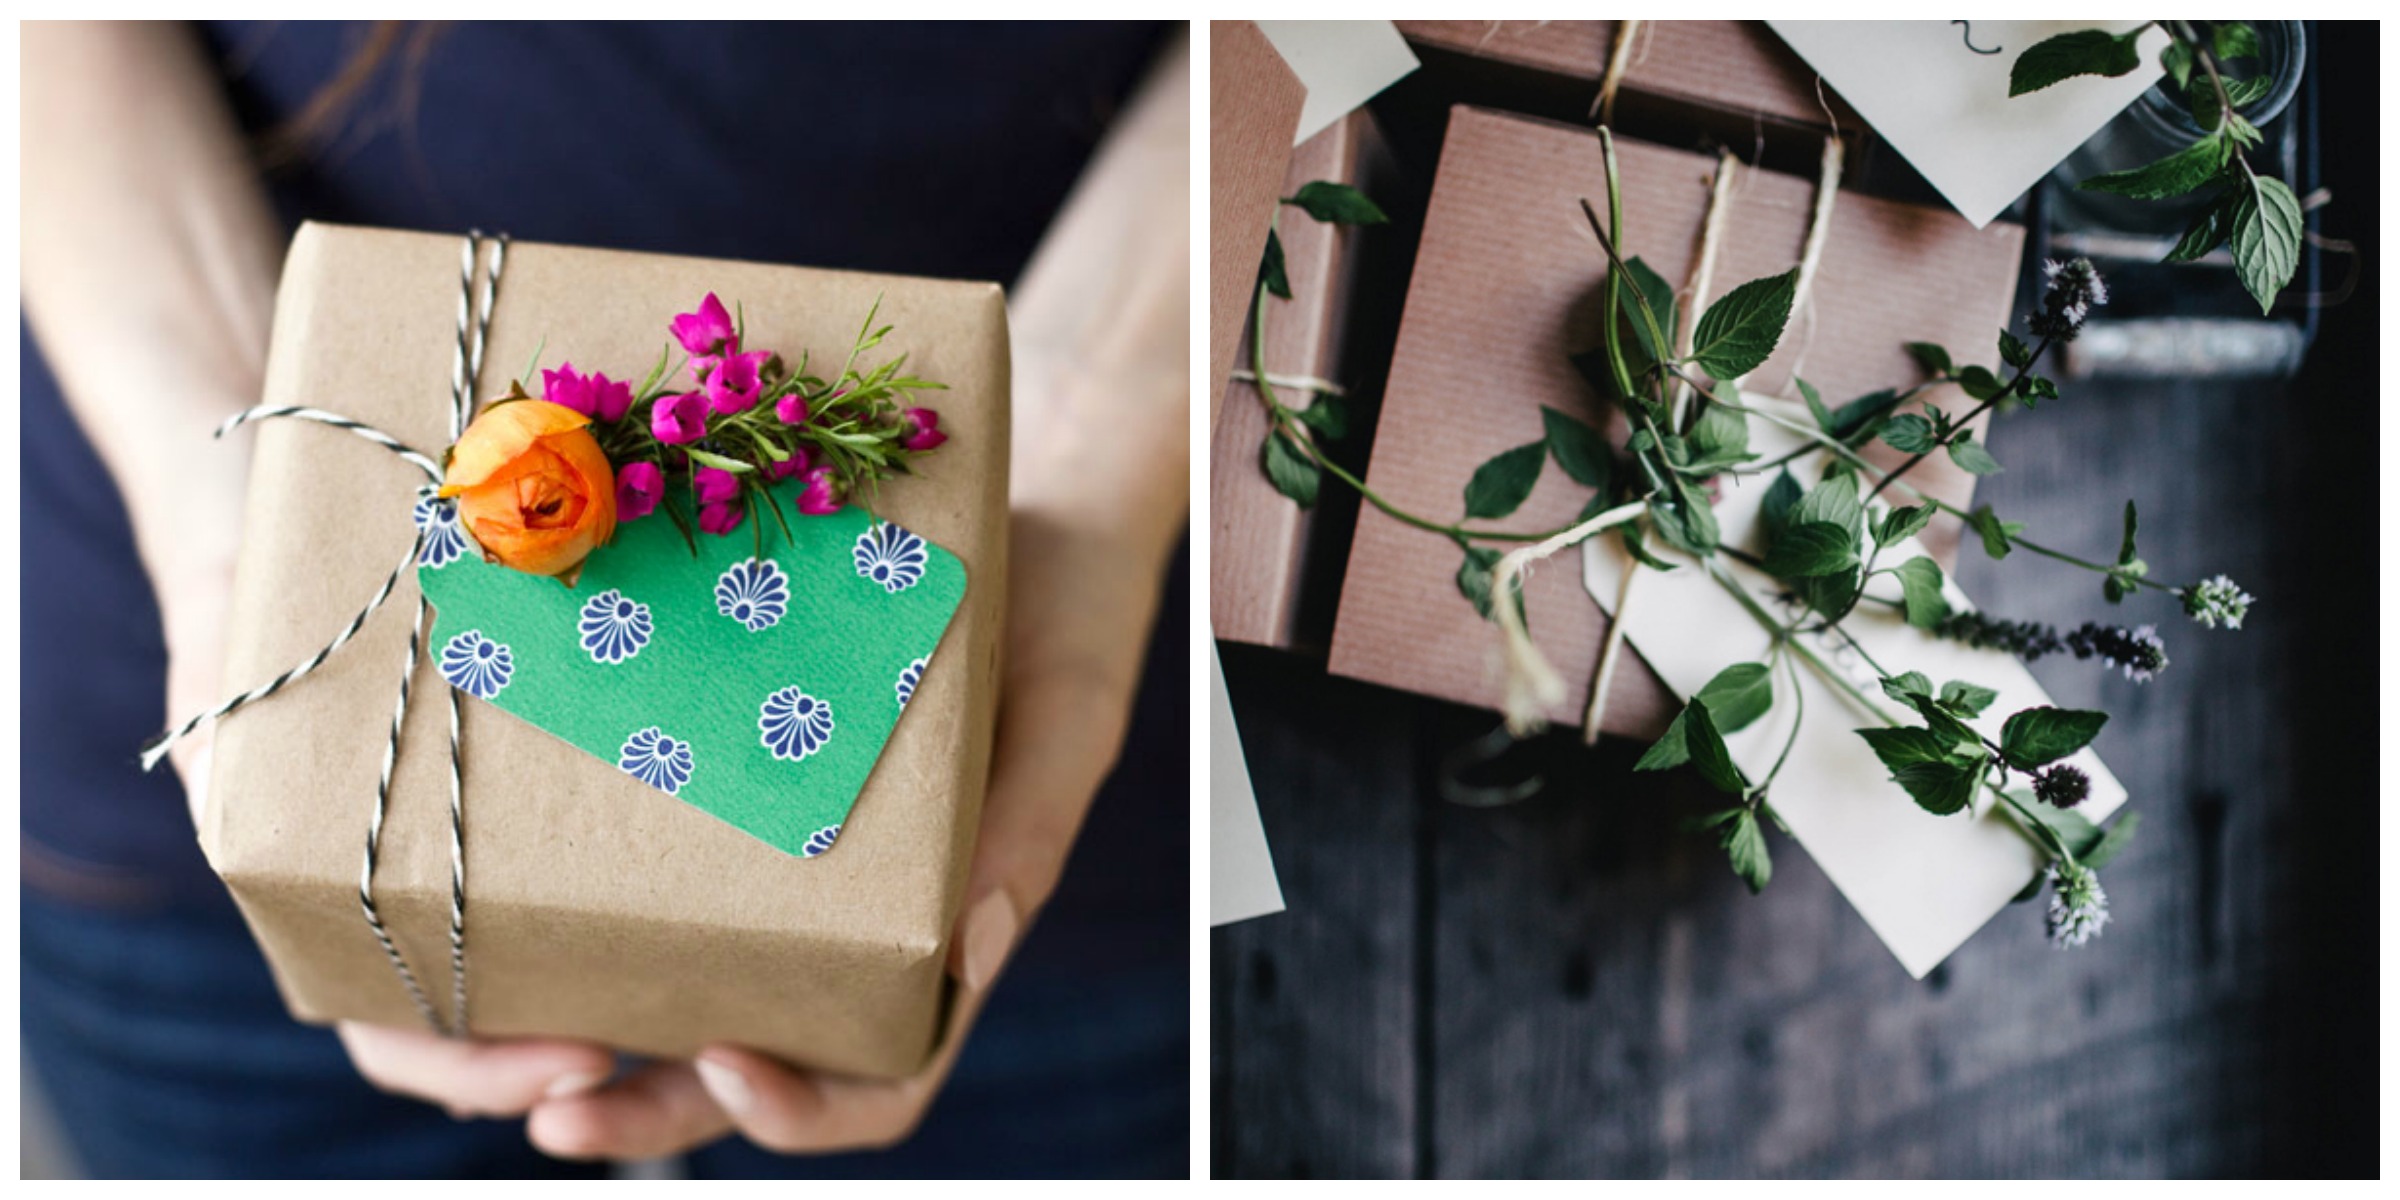 14 creative gift wrap ideas to make your nice list feel super special this holiday season